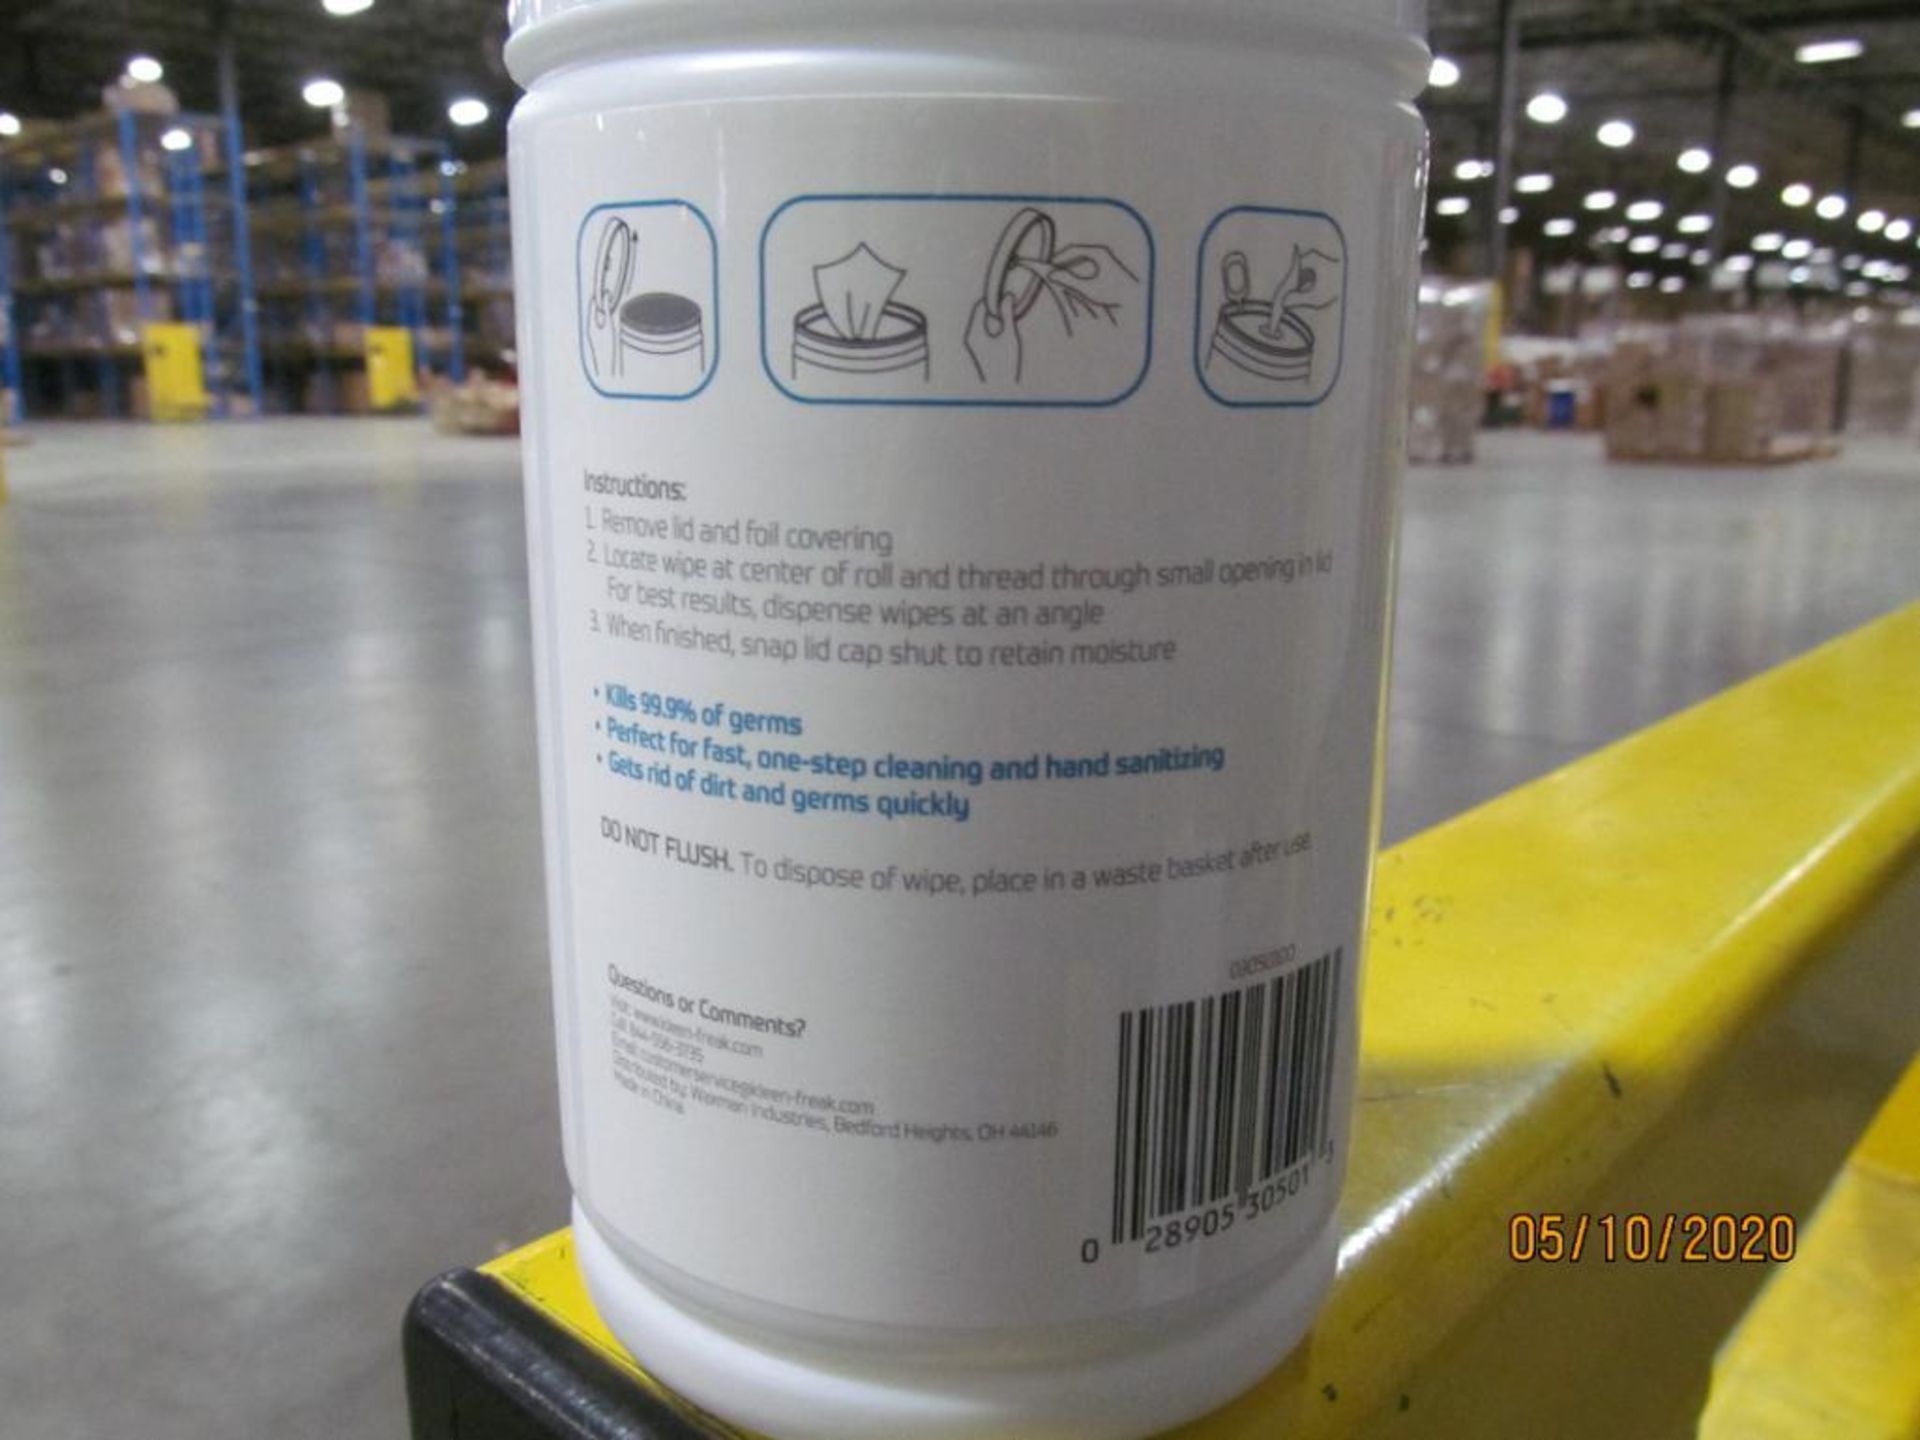 Lot of Waxman Kleen Freak Sanitizing Wipes consisting of 366,768 packages on 566 pallets. Each packa - Image 2 of 11